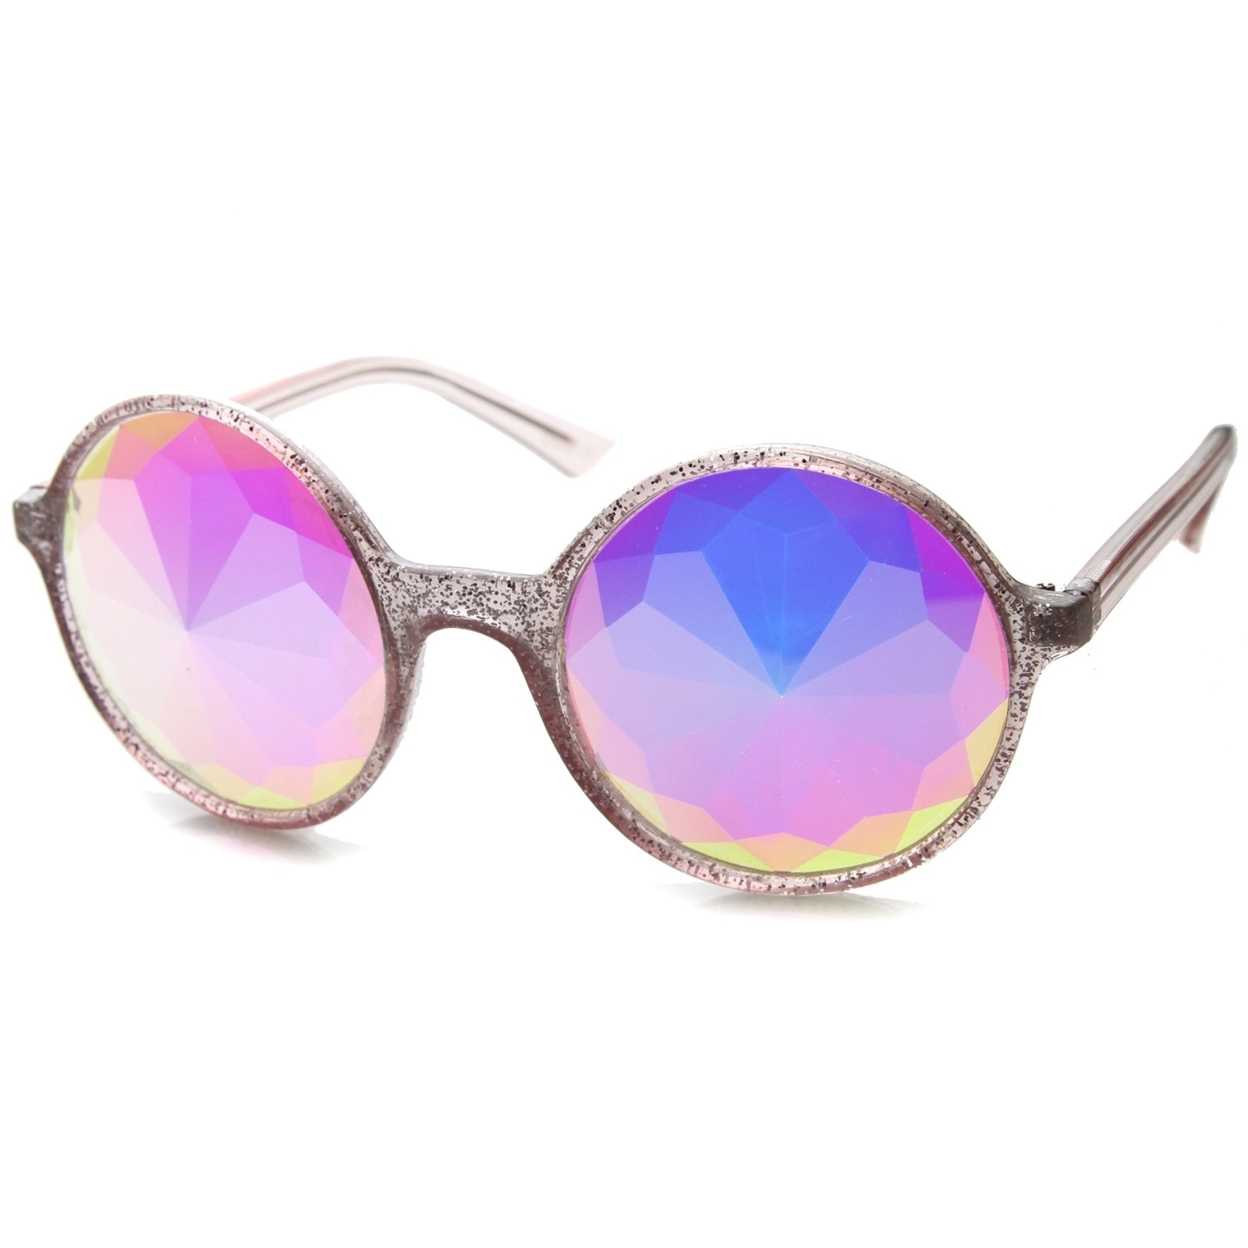 ValleyCity X ZeroUV Limited Edition Womens Round Prism Sunglasses 51mm - Yellow-Glitter / Prism